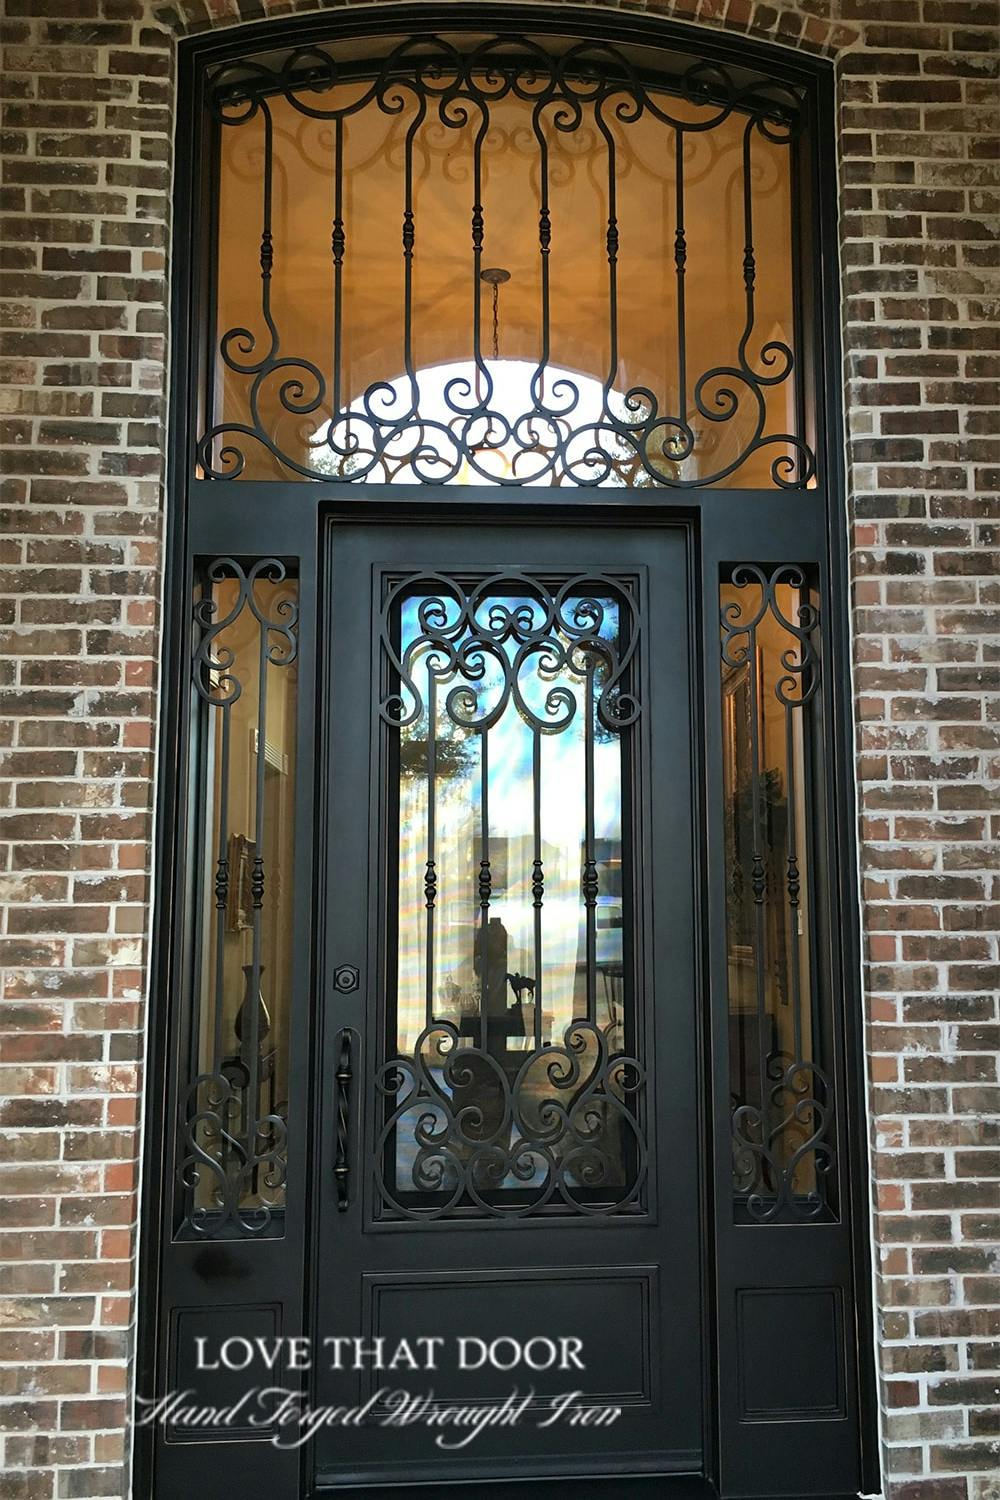 Artisan-crafted iron door and transom ensemble, exhibiting meticulous attention to detail.